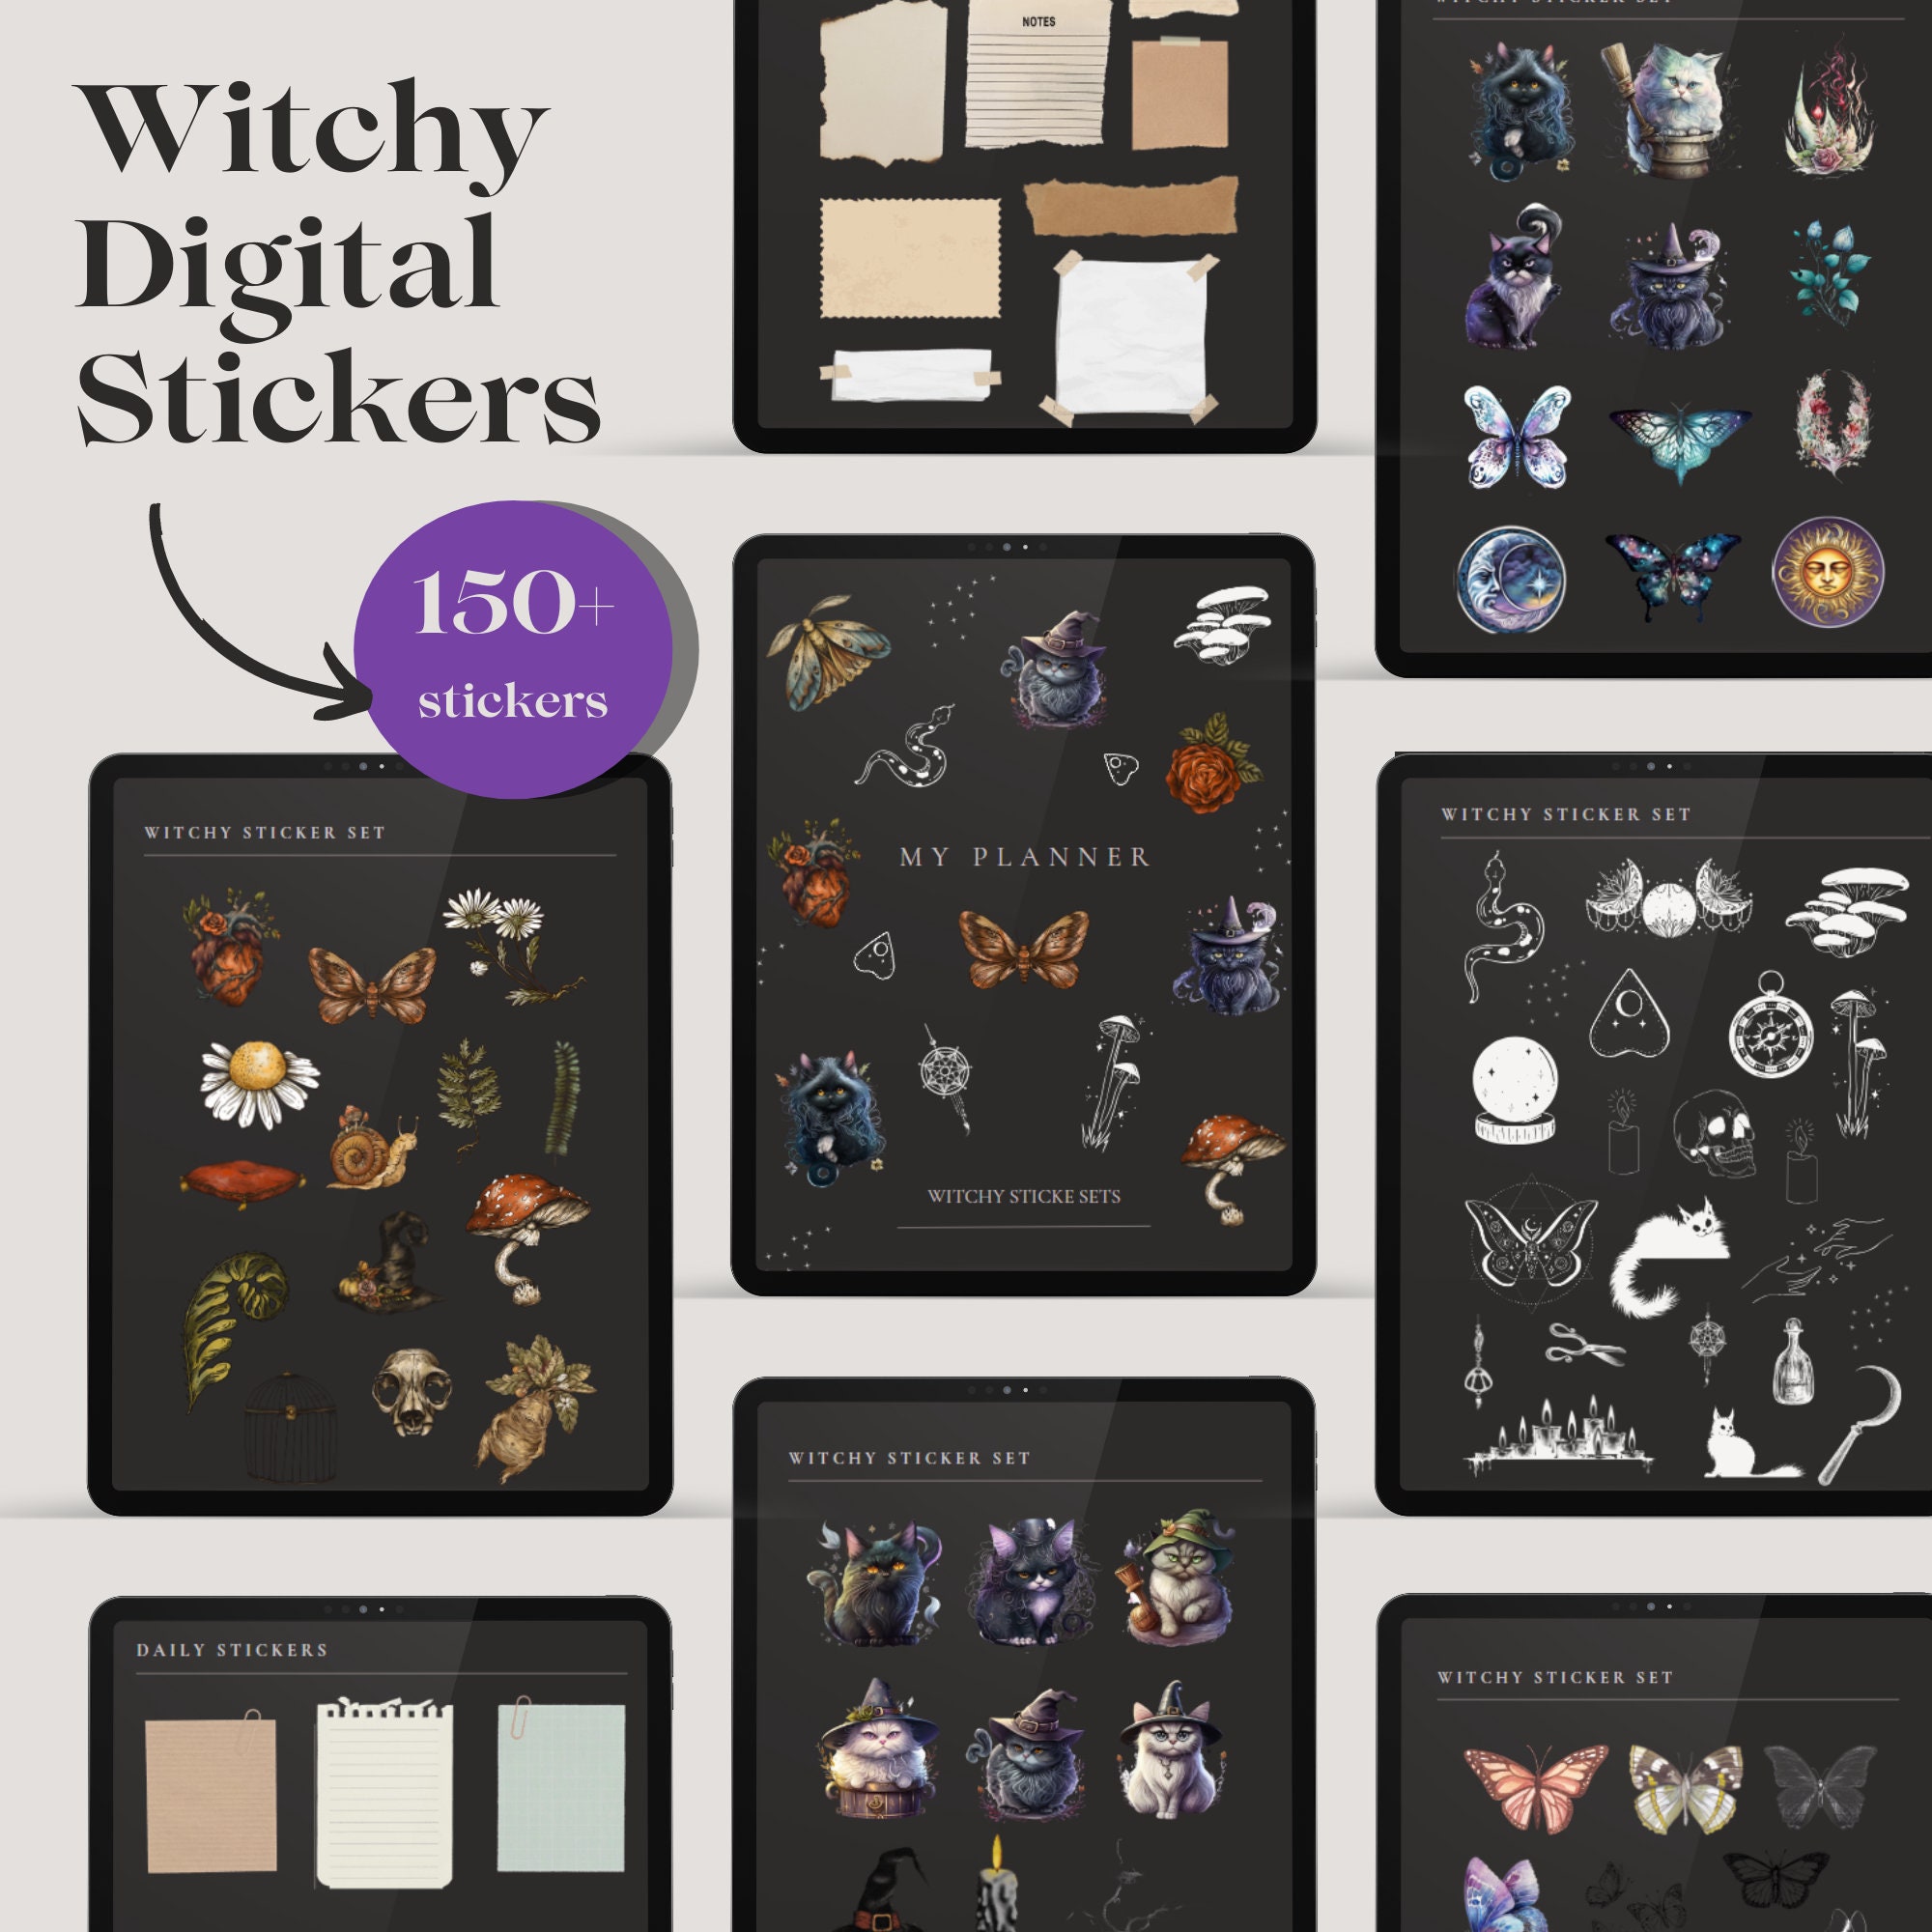 Witchy Digital Sticker Pack, Spiritual Stickers for Witchy Planner, Tarot  Card Goodnotes Stickers 